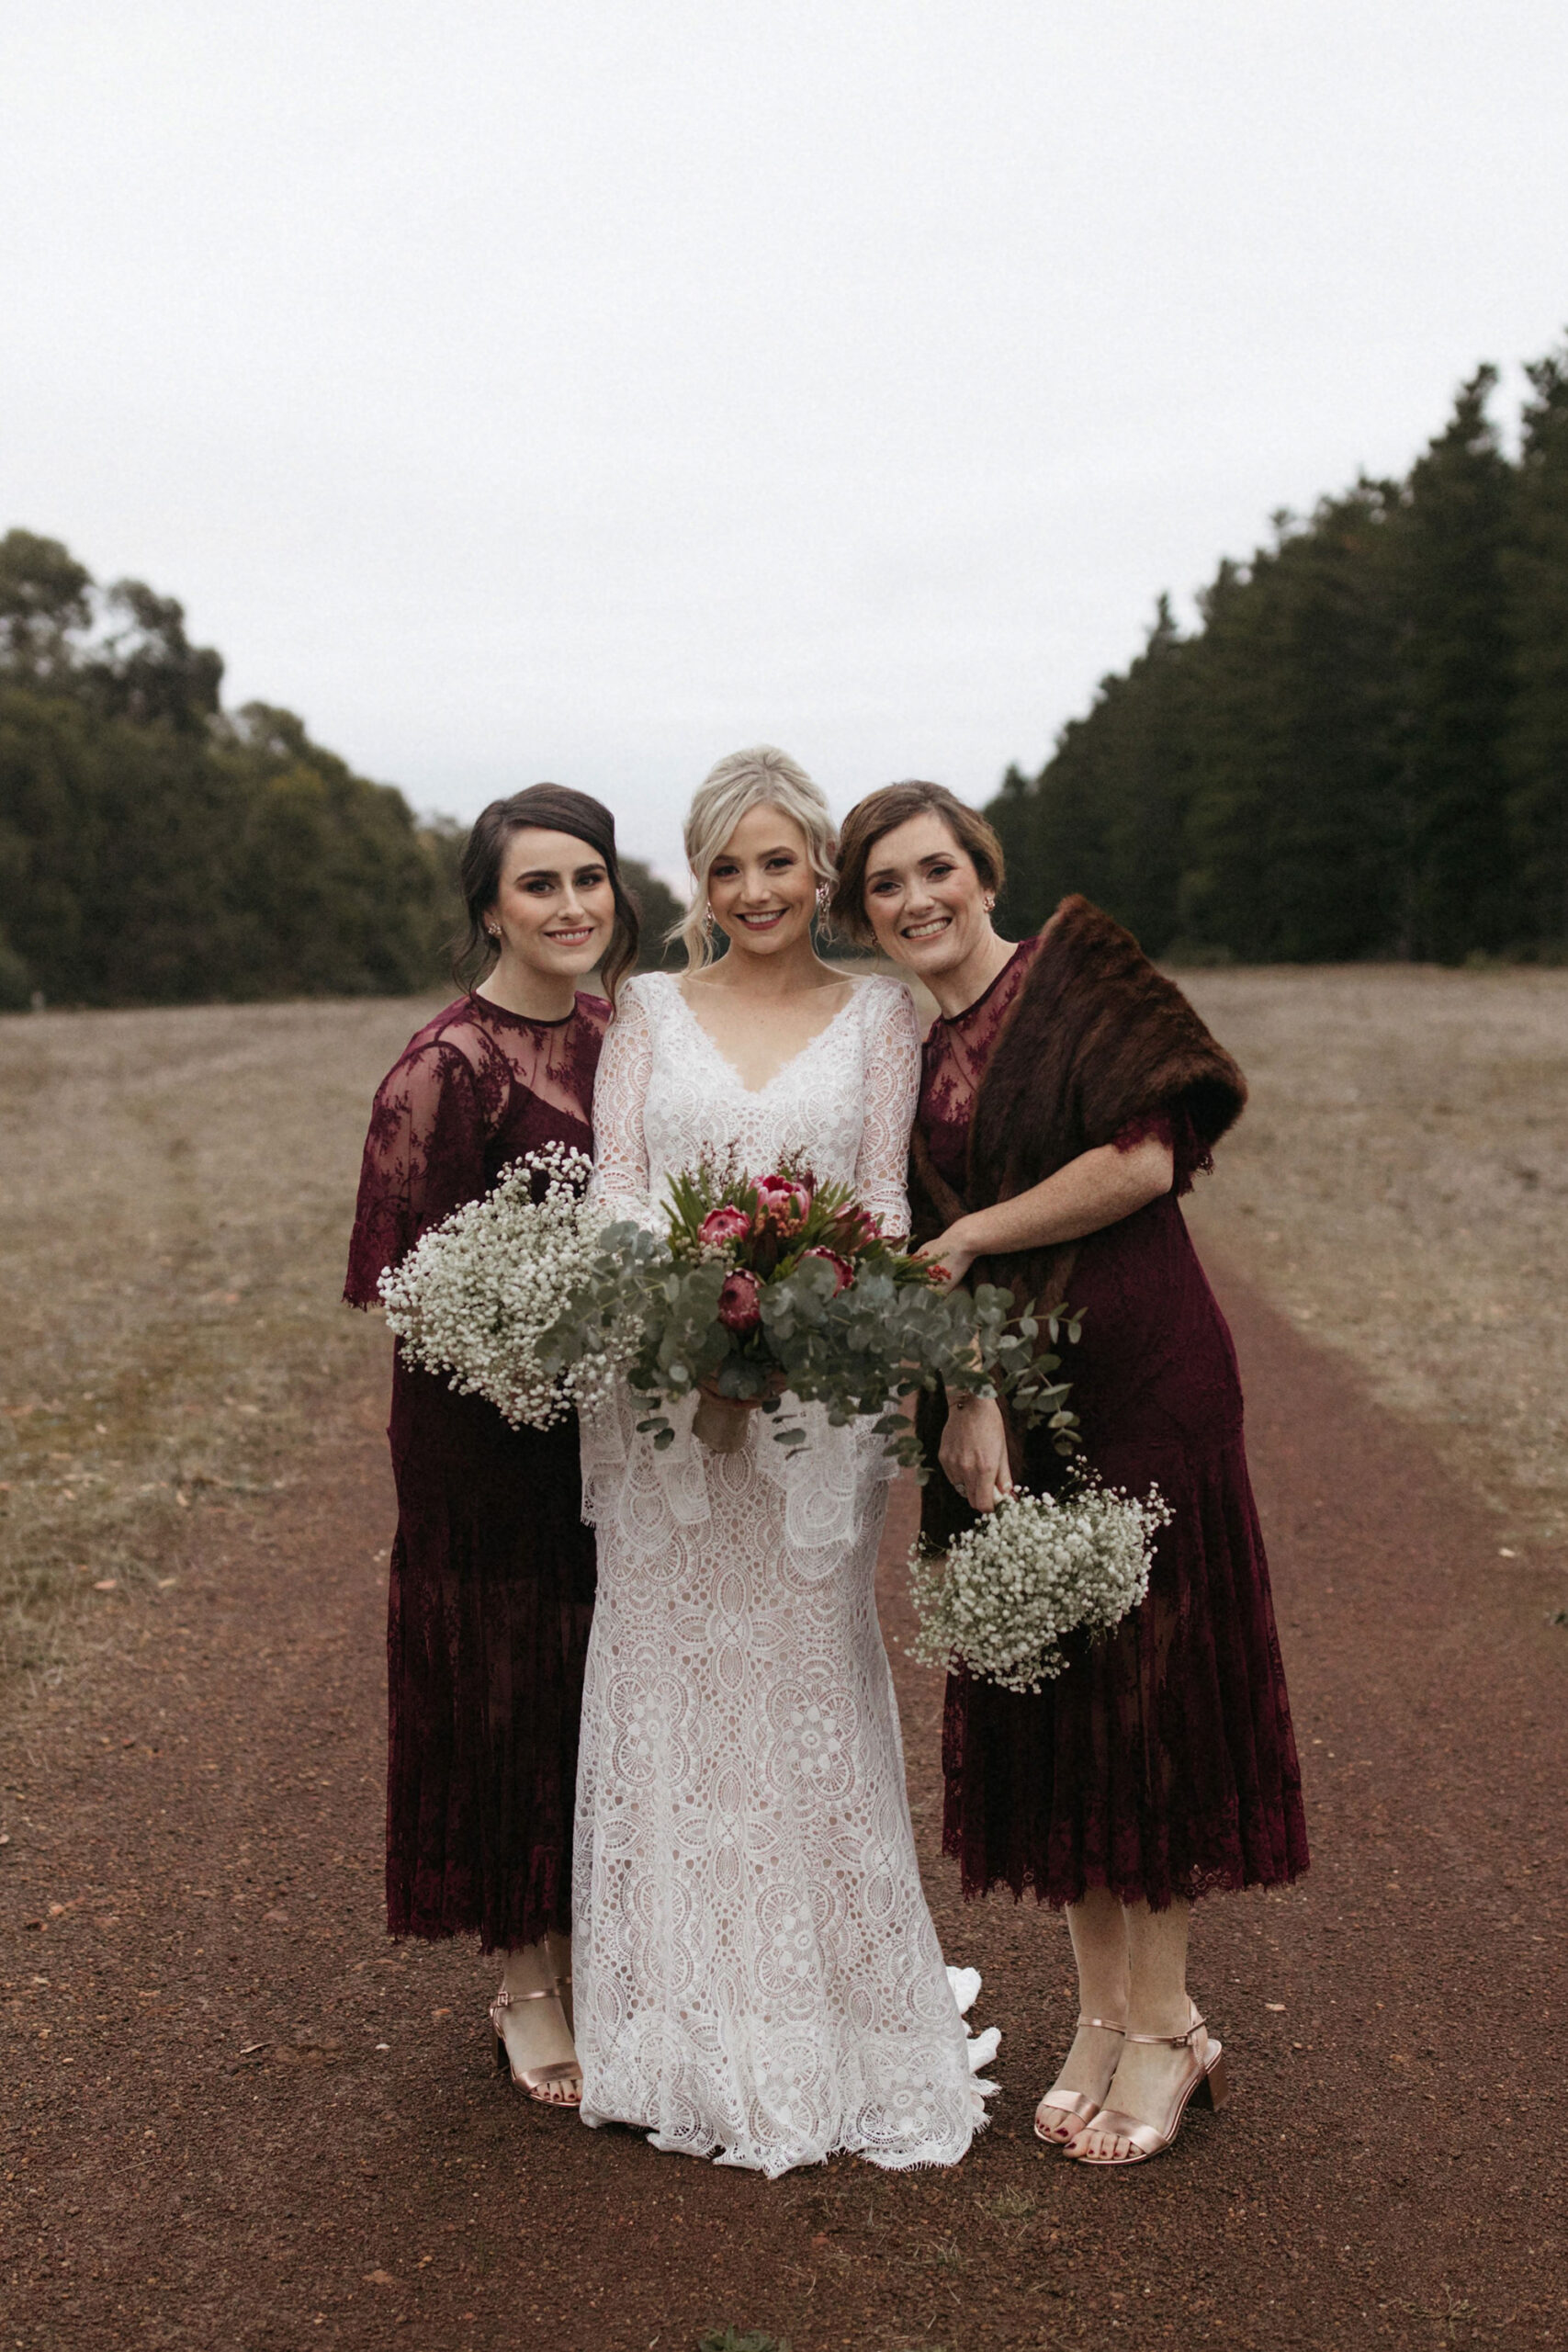 Bec Shaan Forest Country Wedding Dan Evans Photography SBS 034 scaled